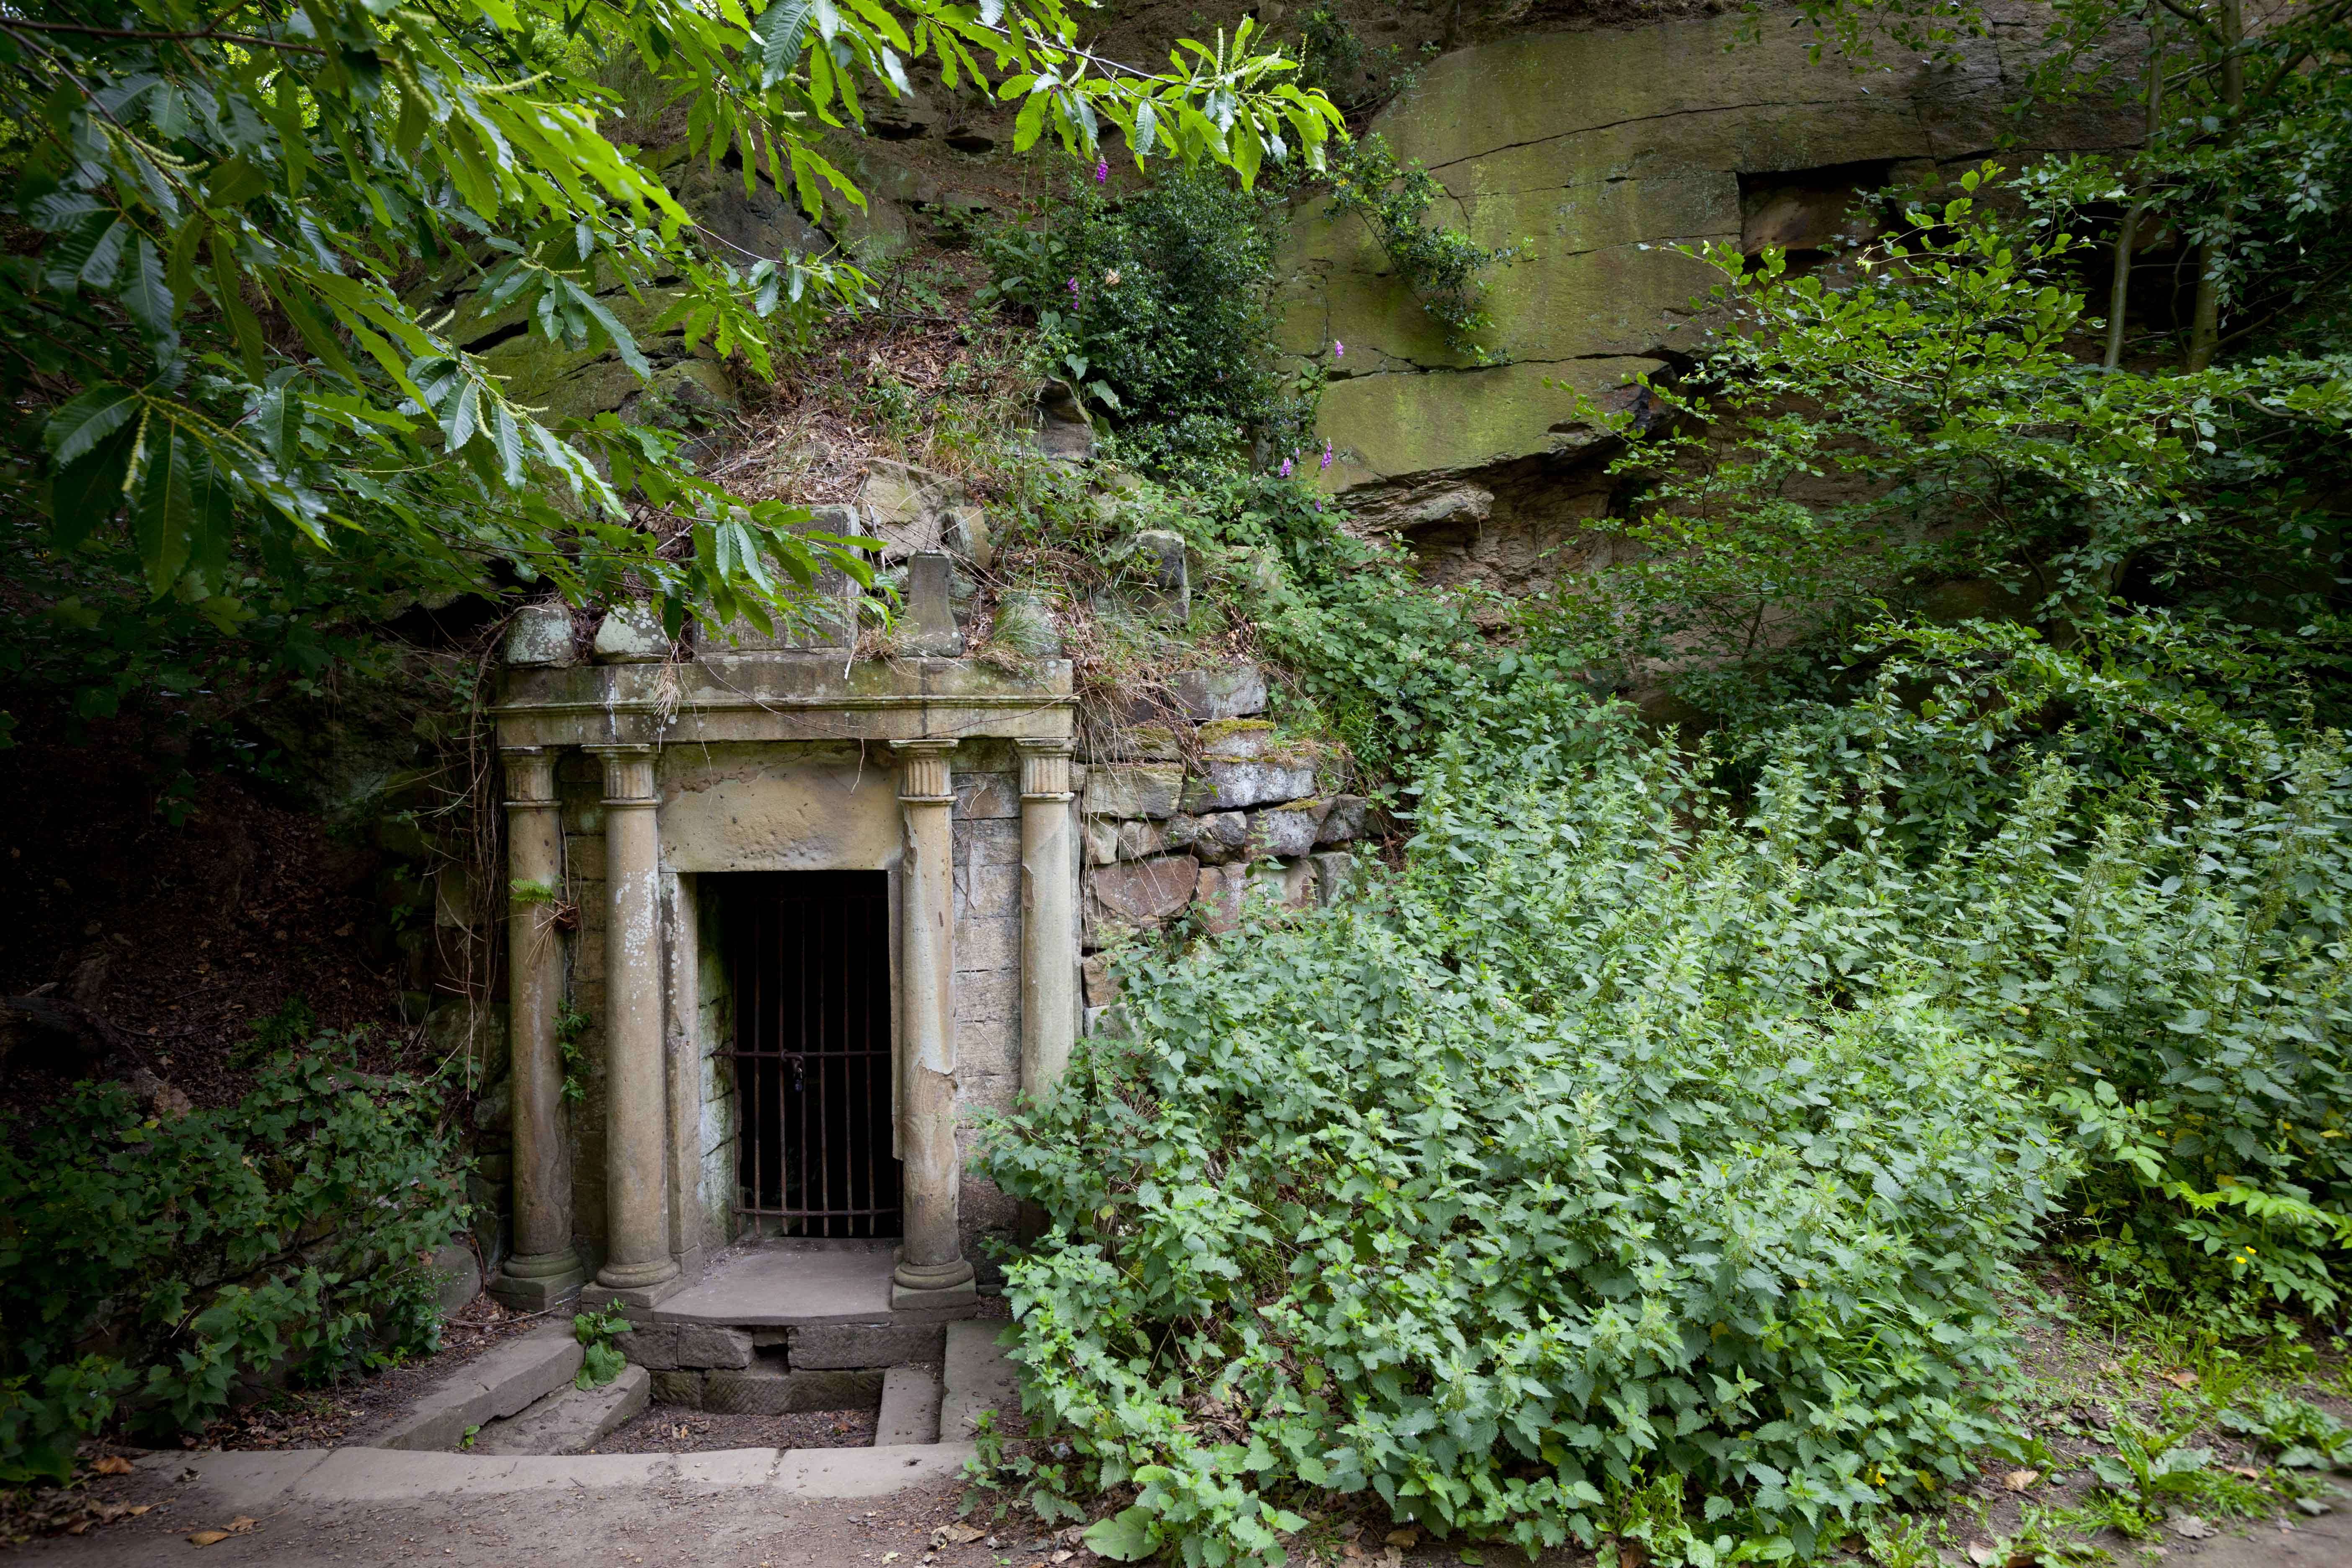 Lady Eglinton's Well embedded into rocks surrounded by greenery.